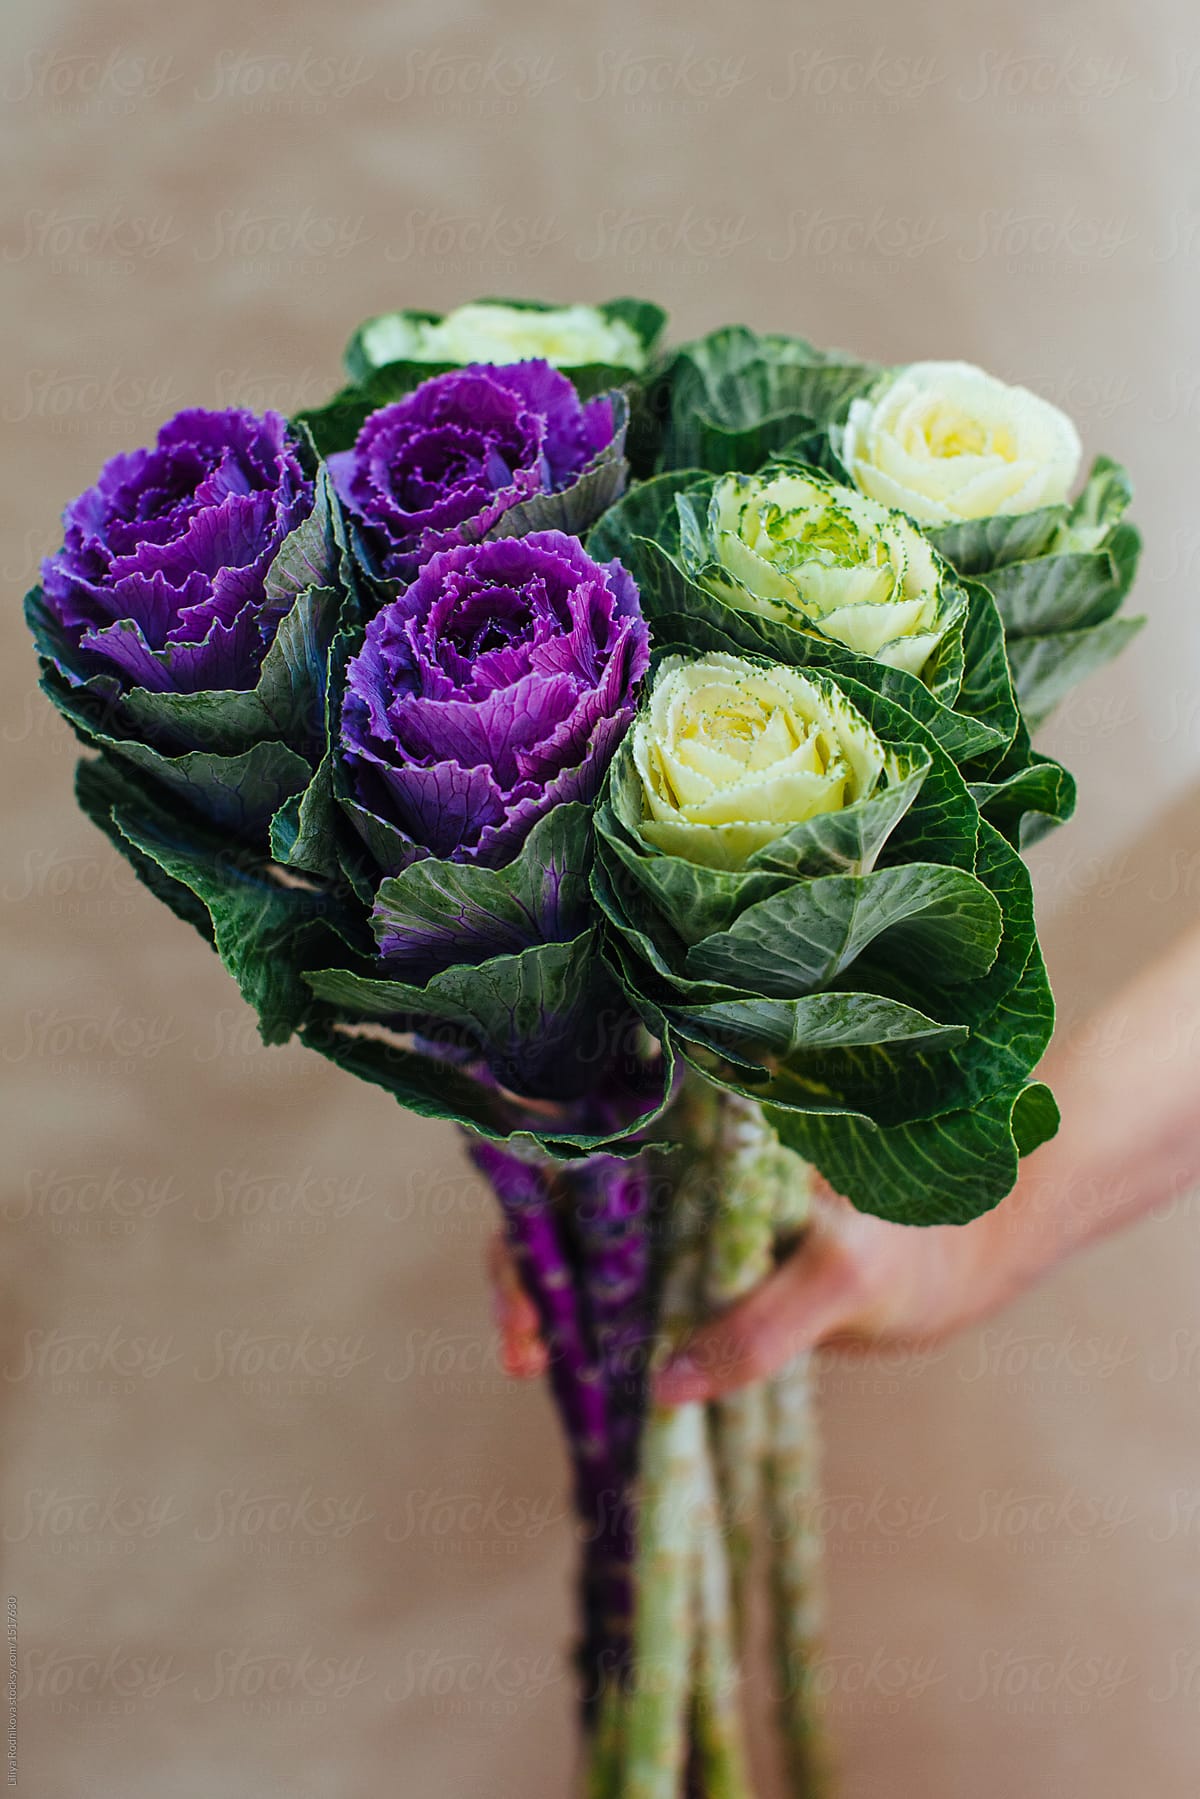 Closeup view of hand holding ornamental cabbage